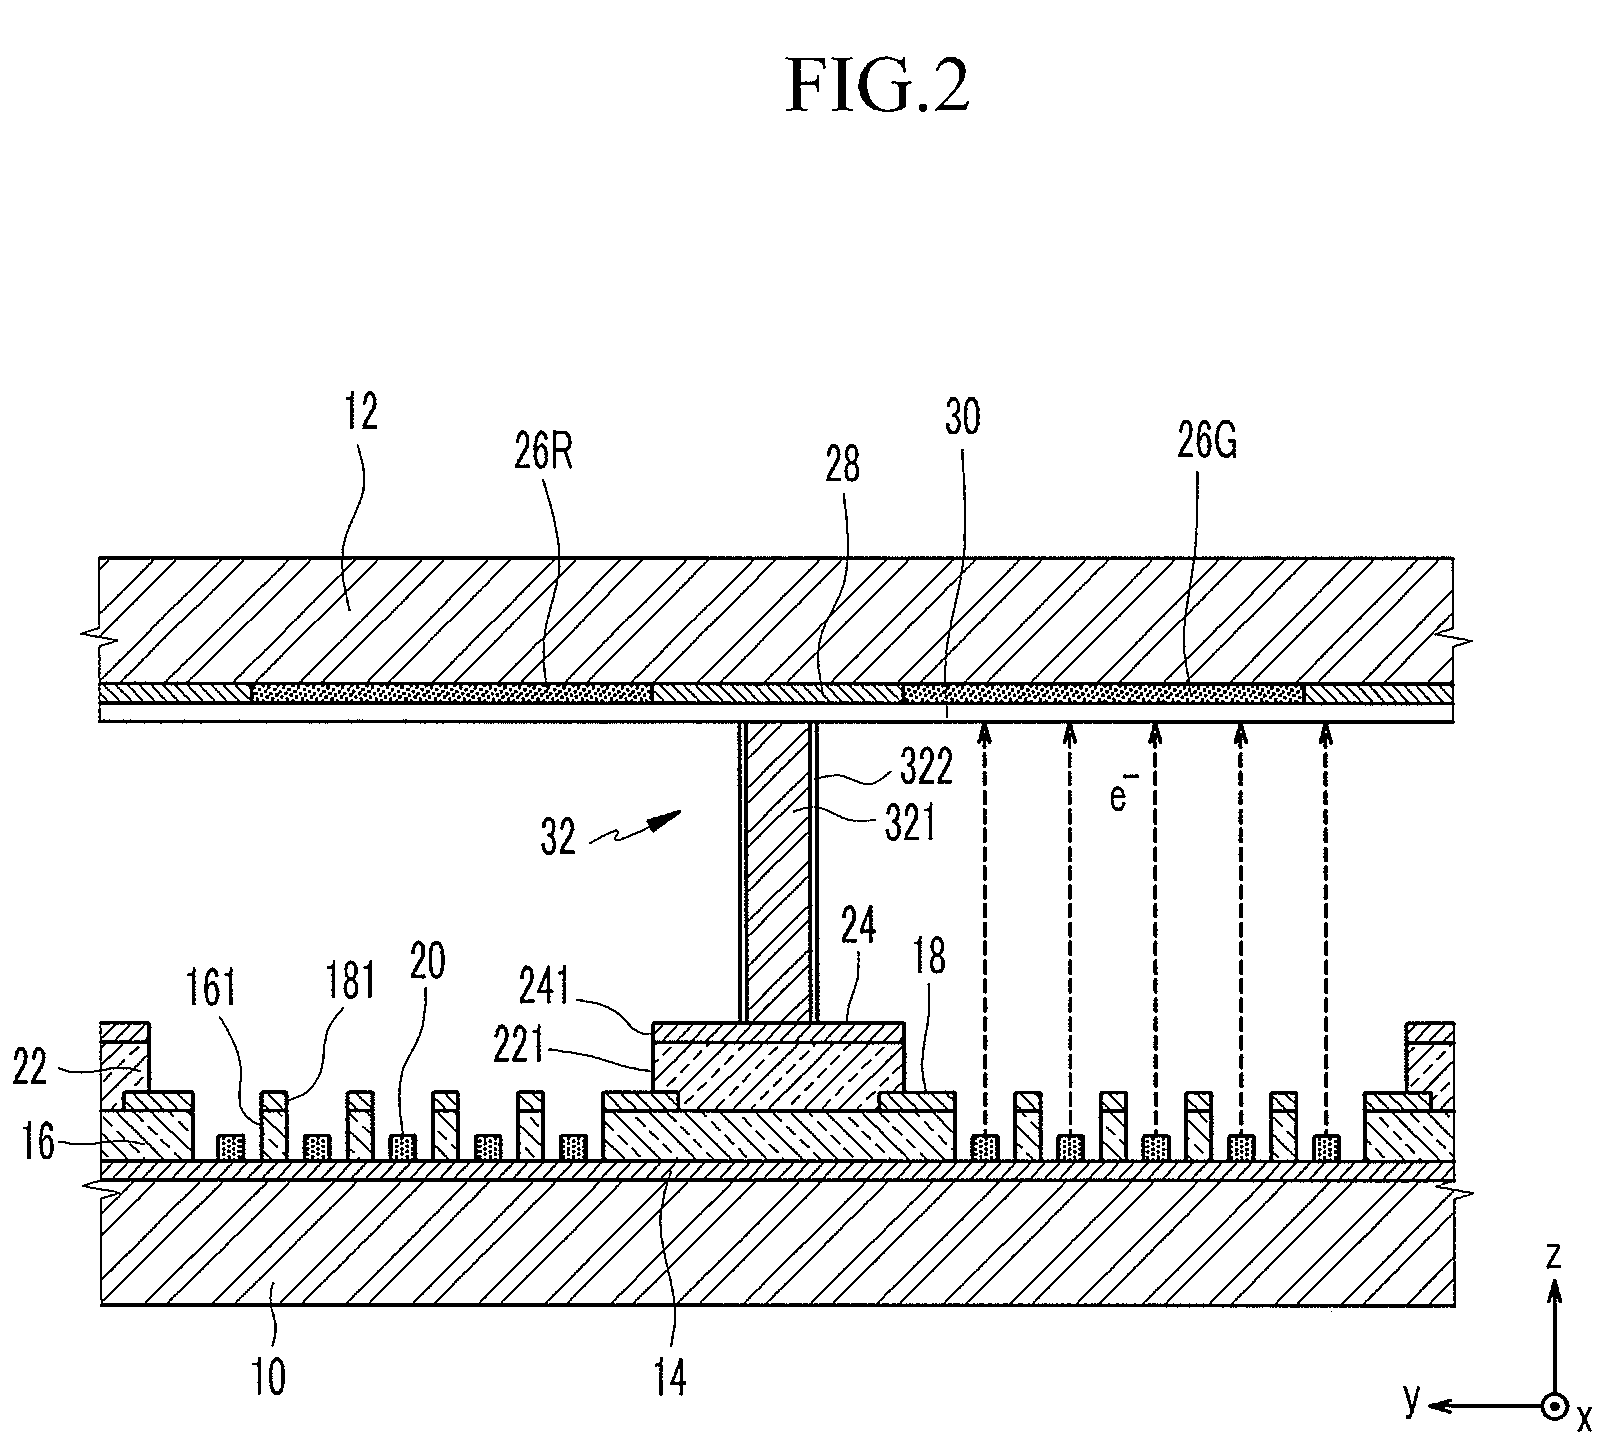 Electron emission display including spacers with layers